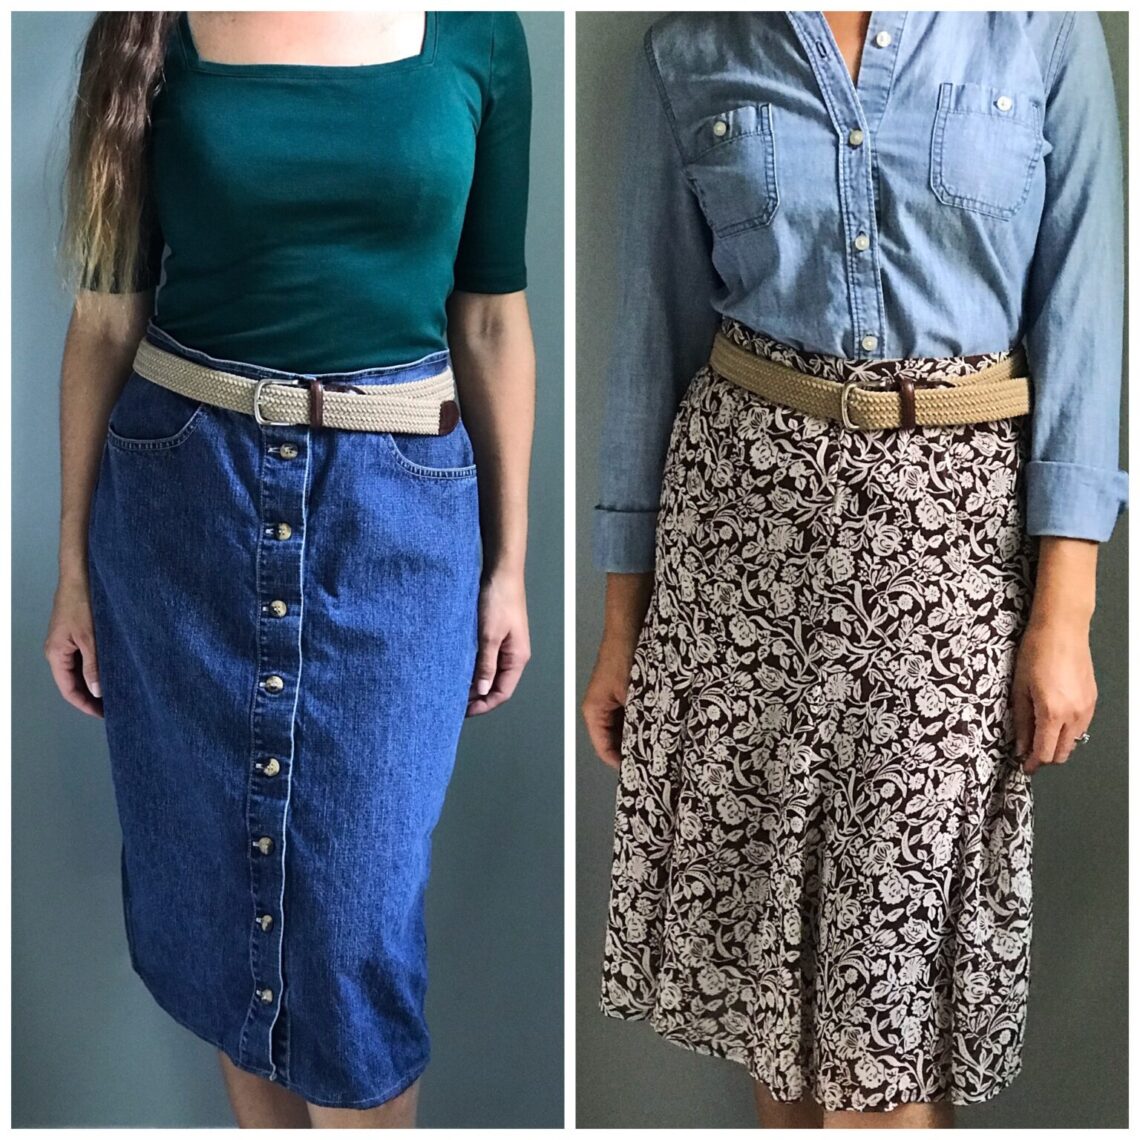 Transitional summer to early fall outfits